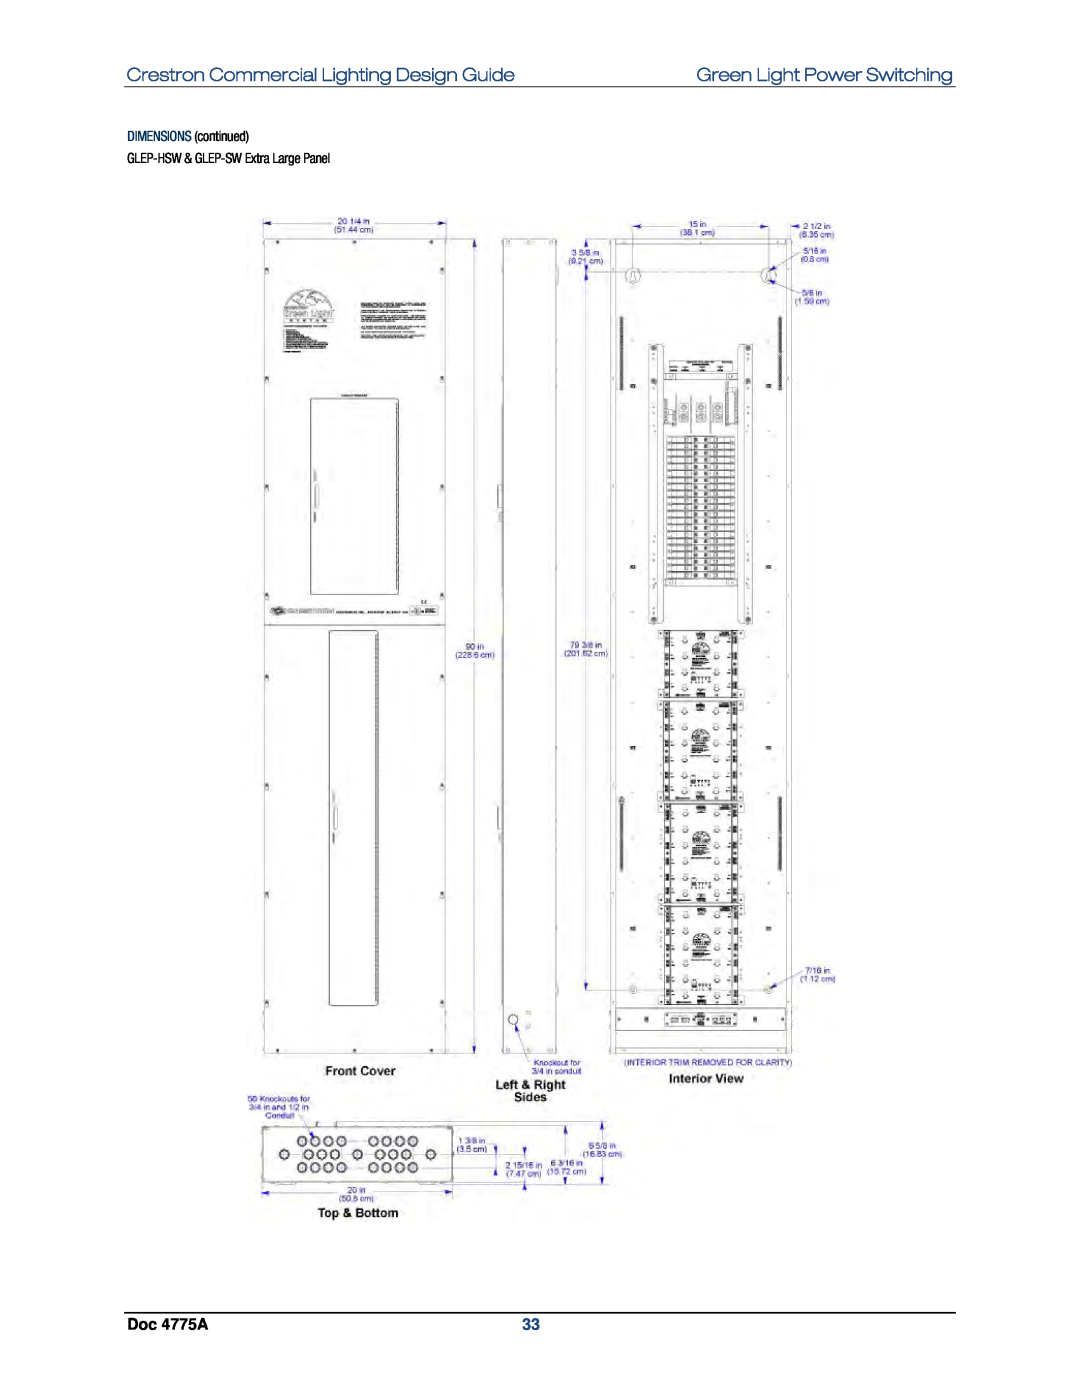 Crestron electronic GLPS-SW, IPAC-GL1 Crestron Commercial Lighting Design Guide, Green Light Power Switching, Doc 4775A 